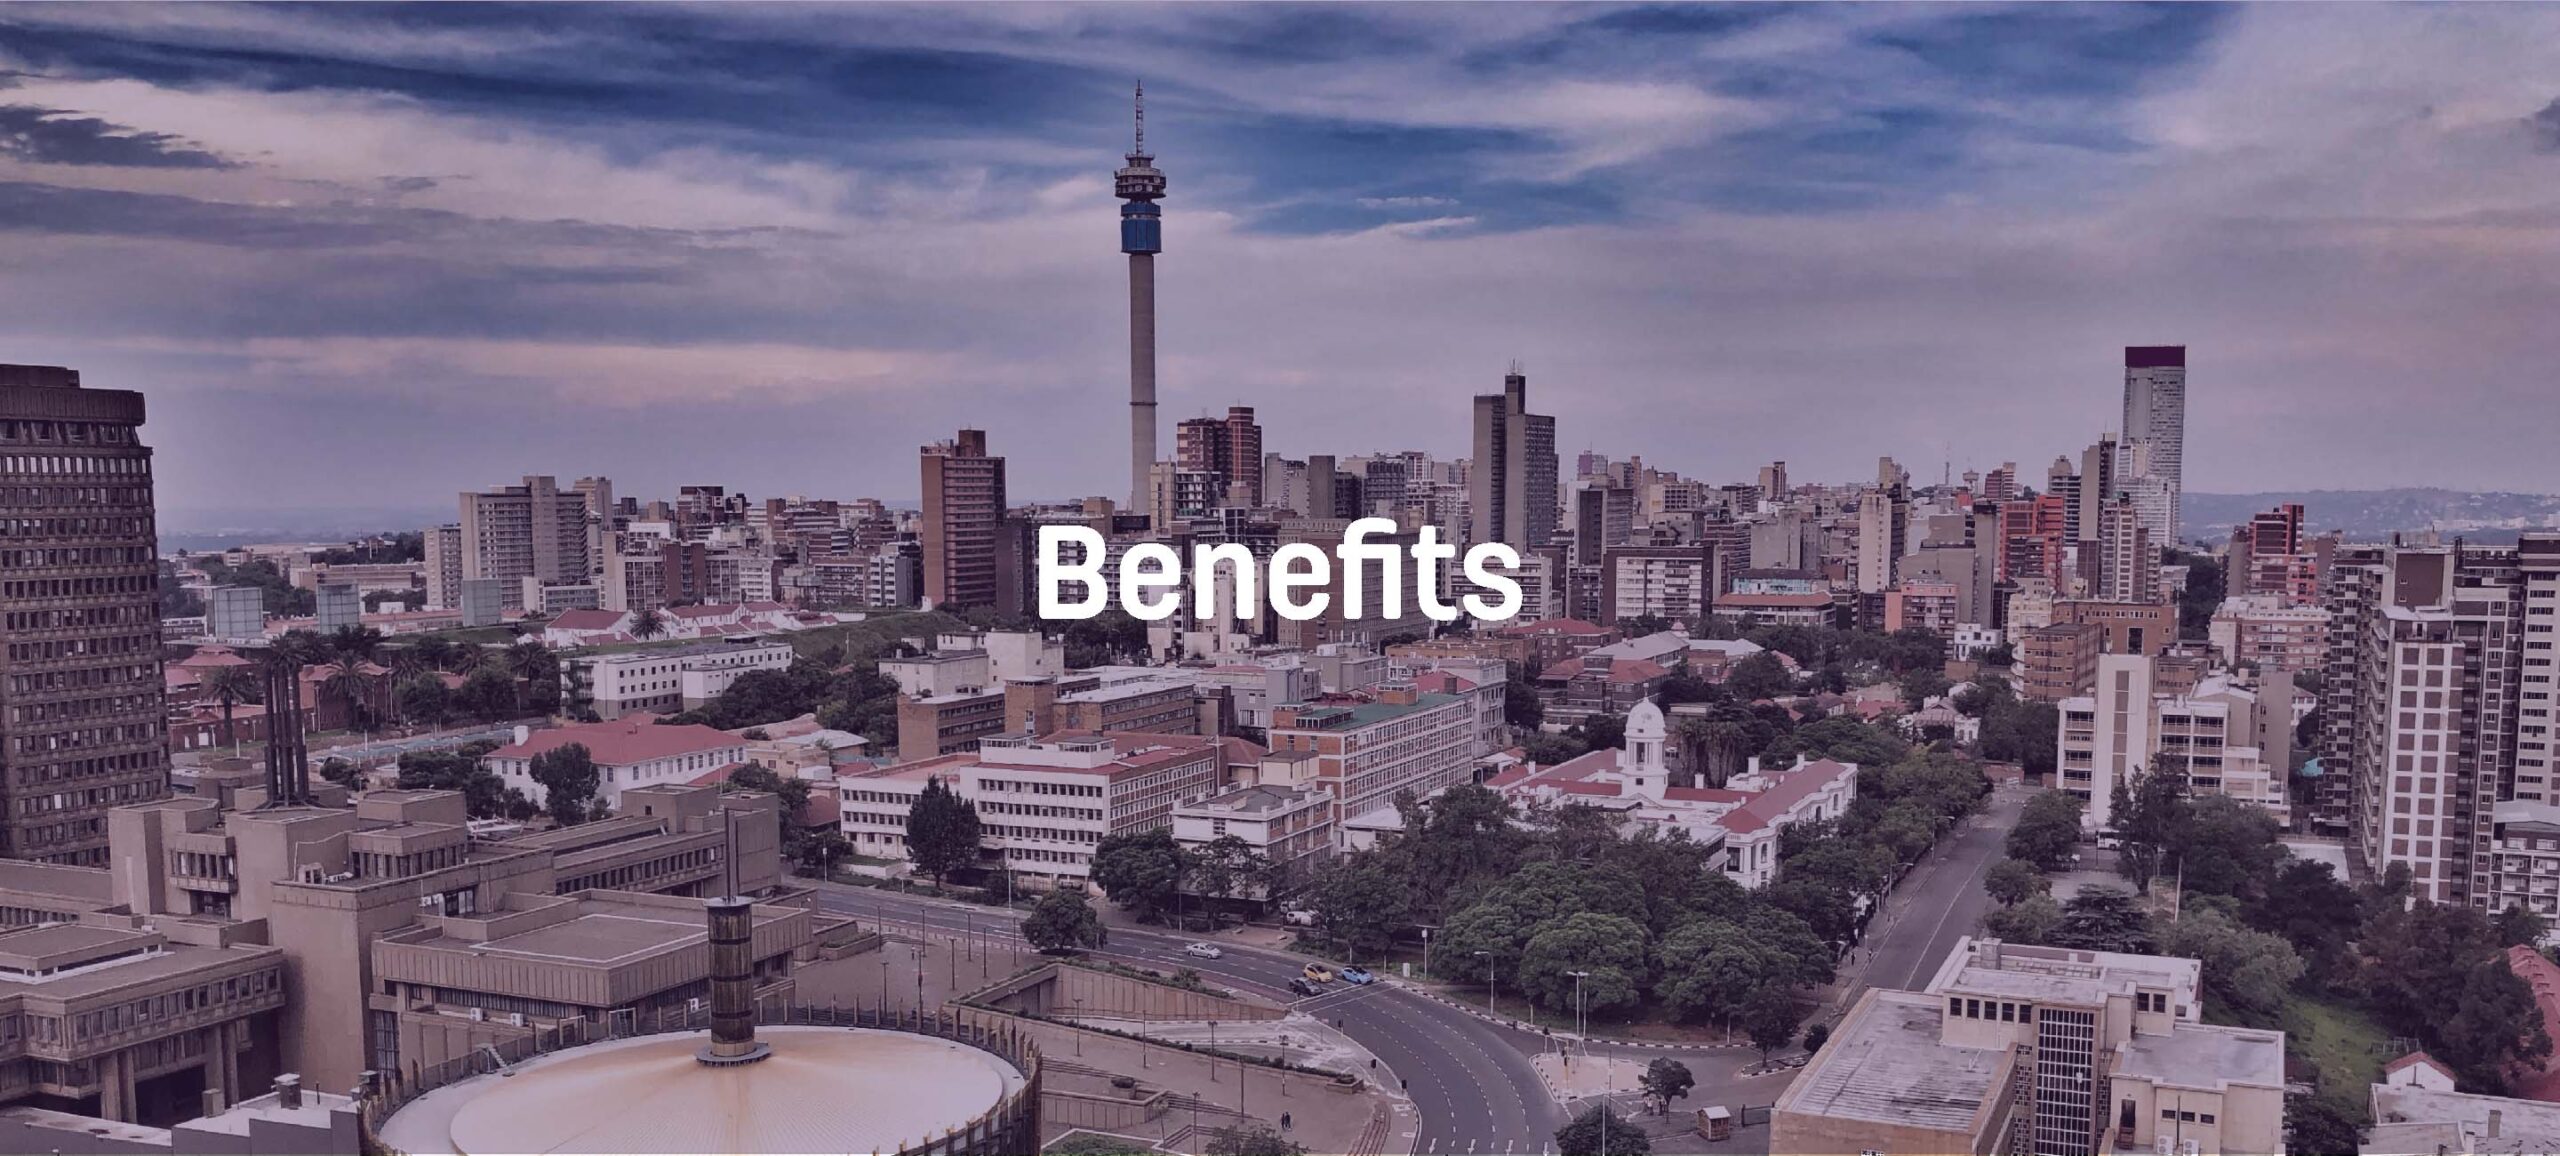 Benefits page image